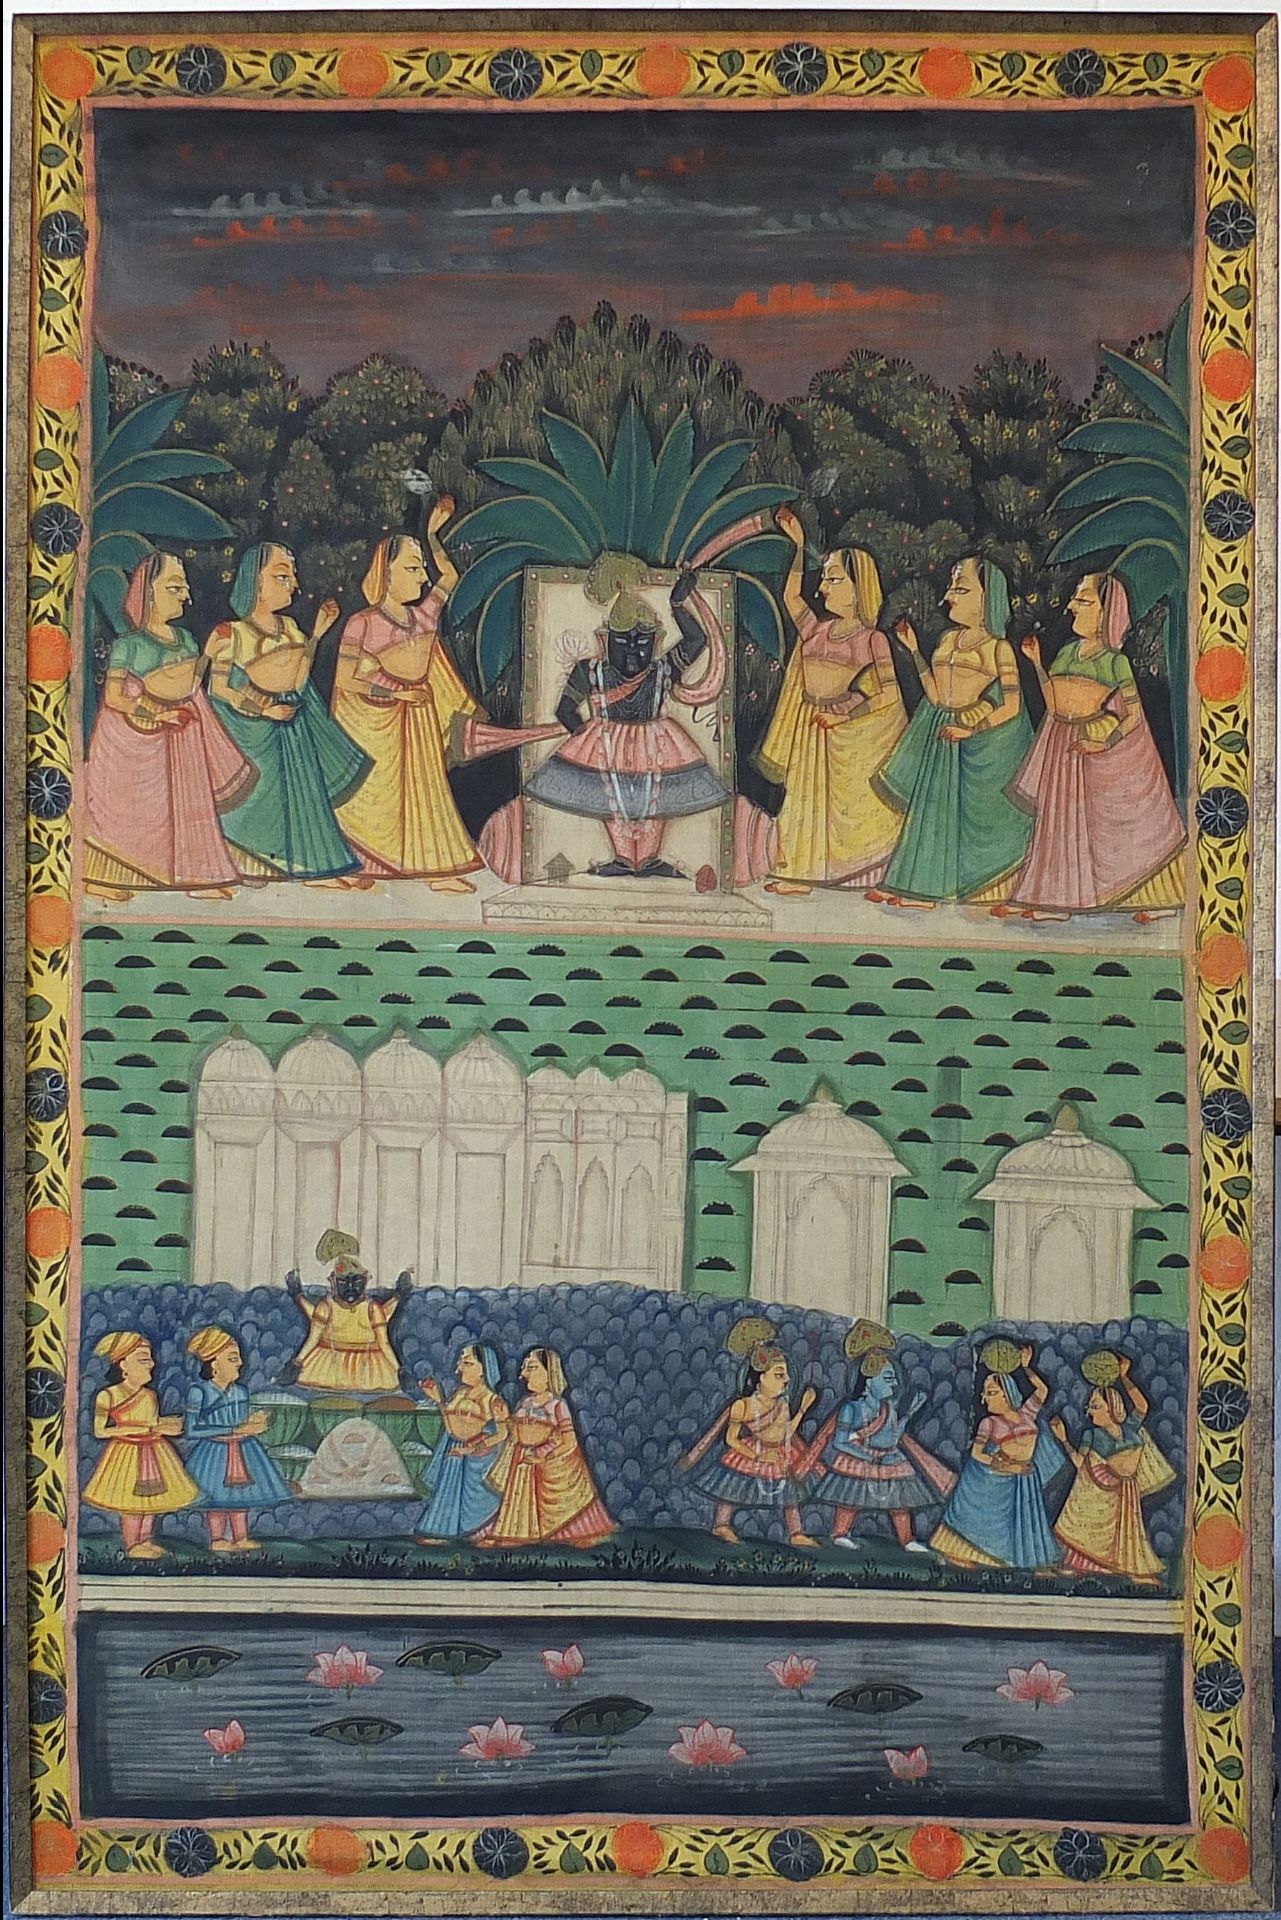 Figures worshipping, Indian Mughal school textile, framed, 168cm x 112cm excluding the frame - Image 2 of 4